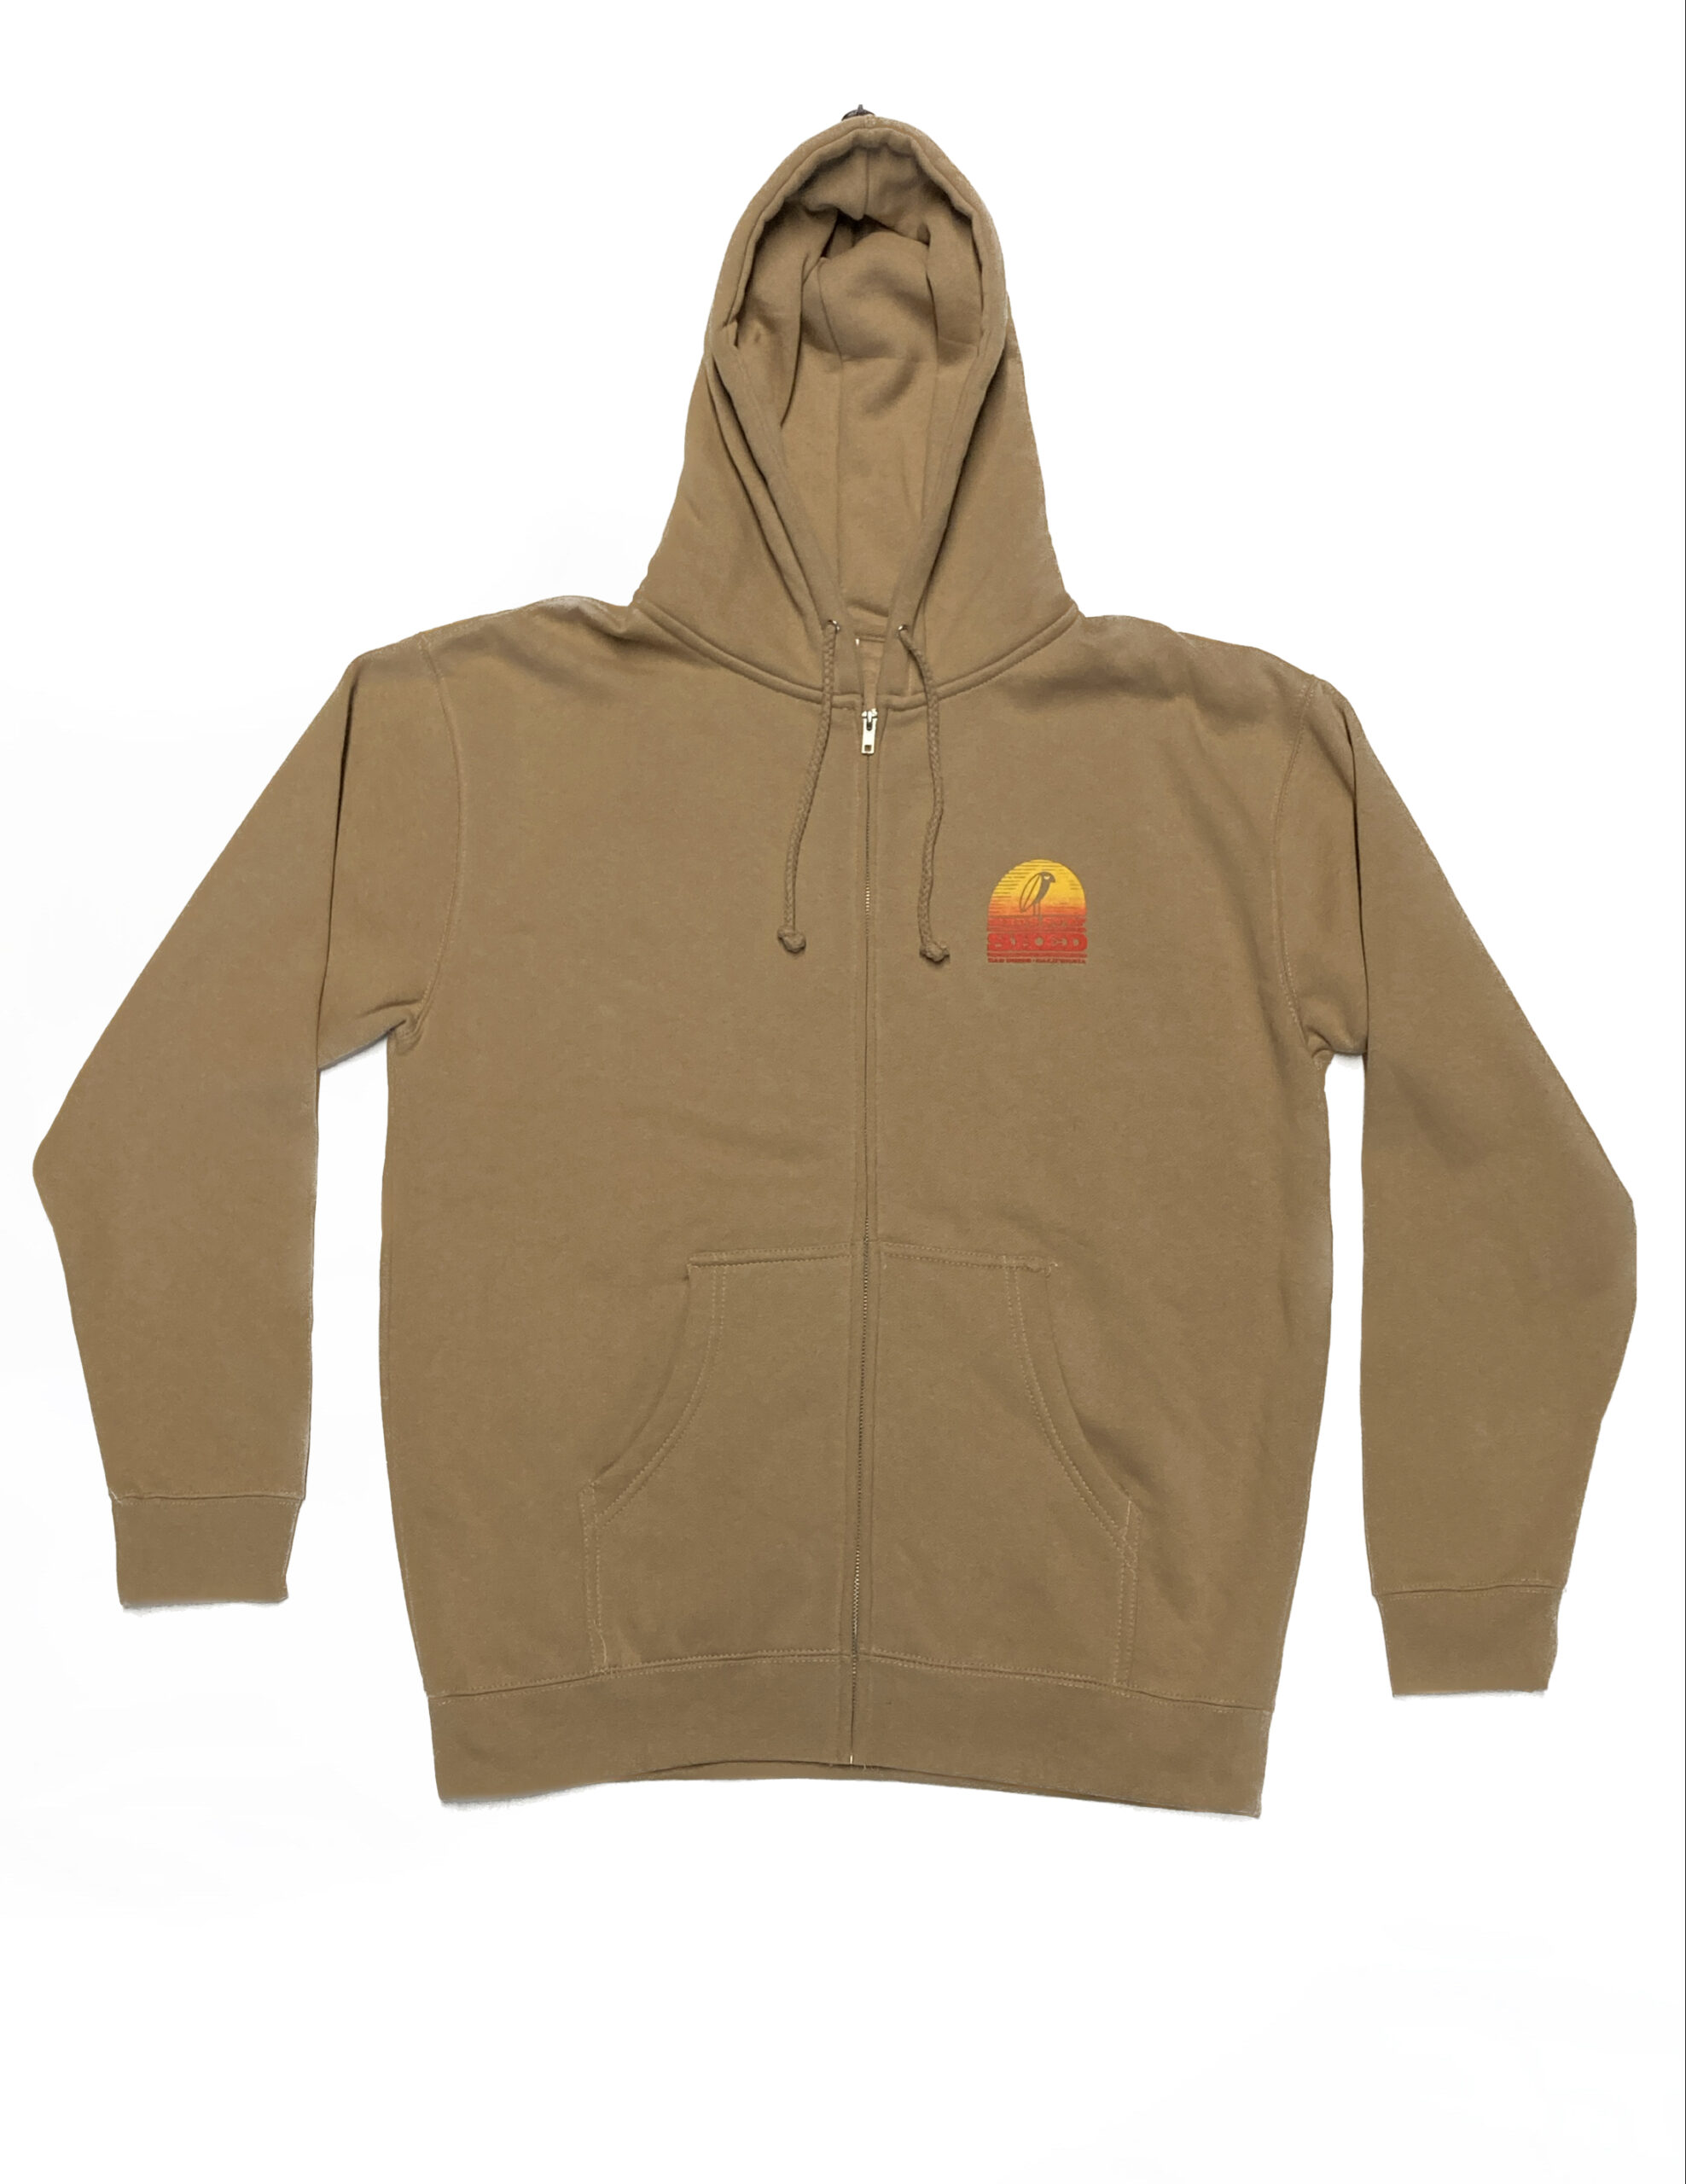 shed zip hoodie tan/sunset front